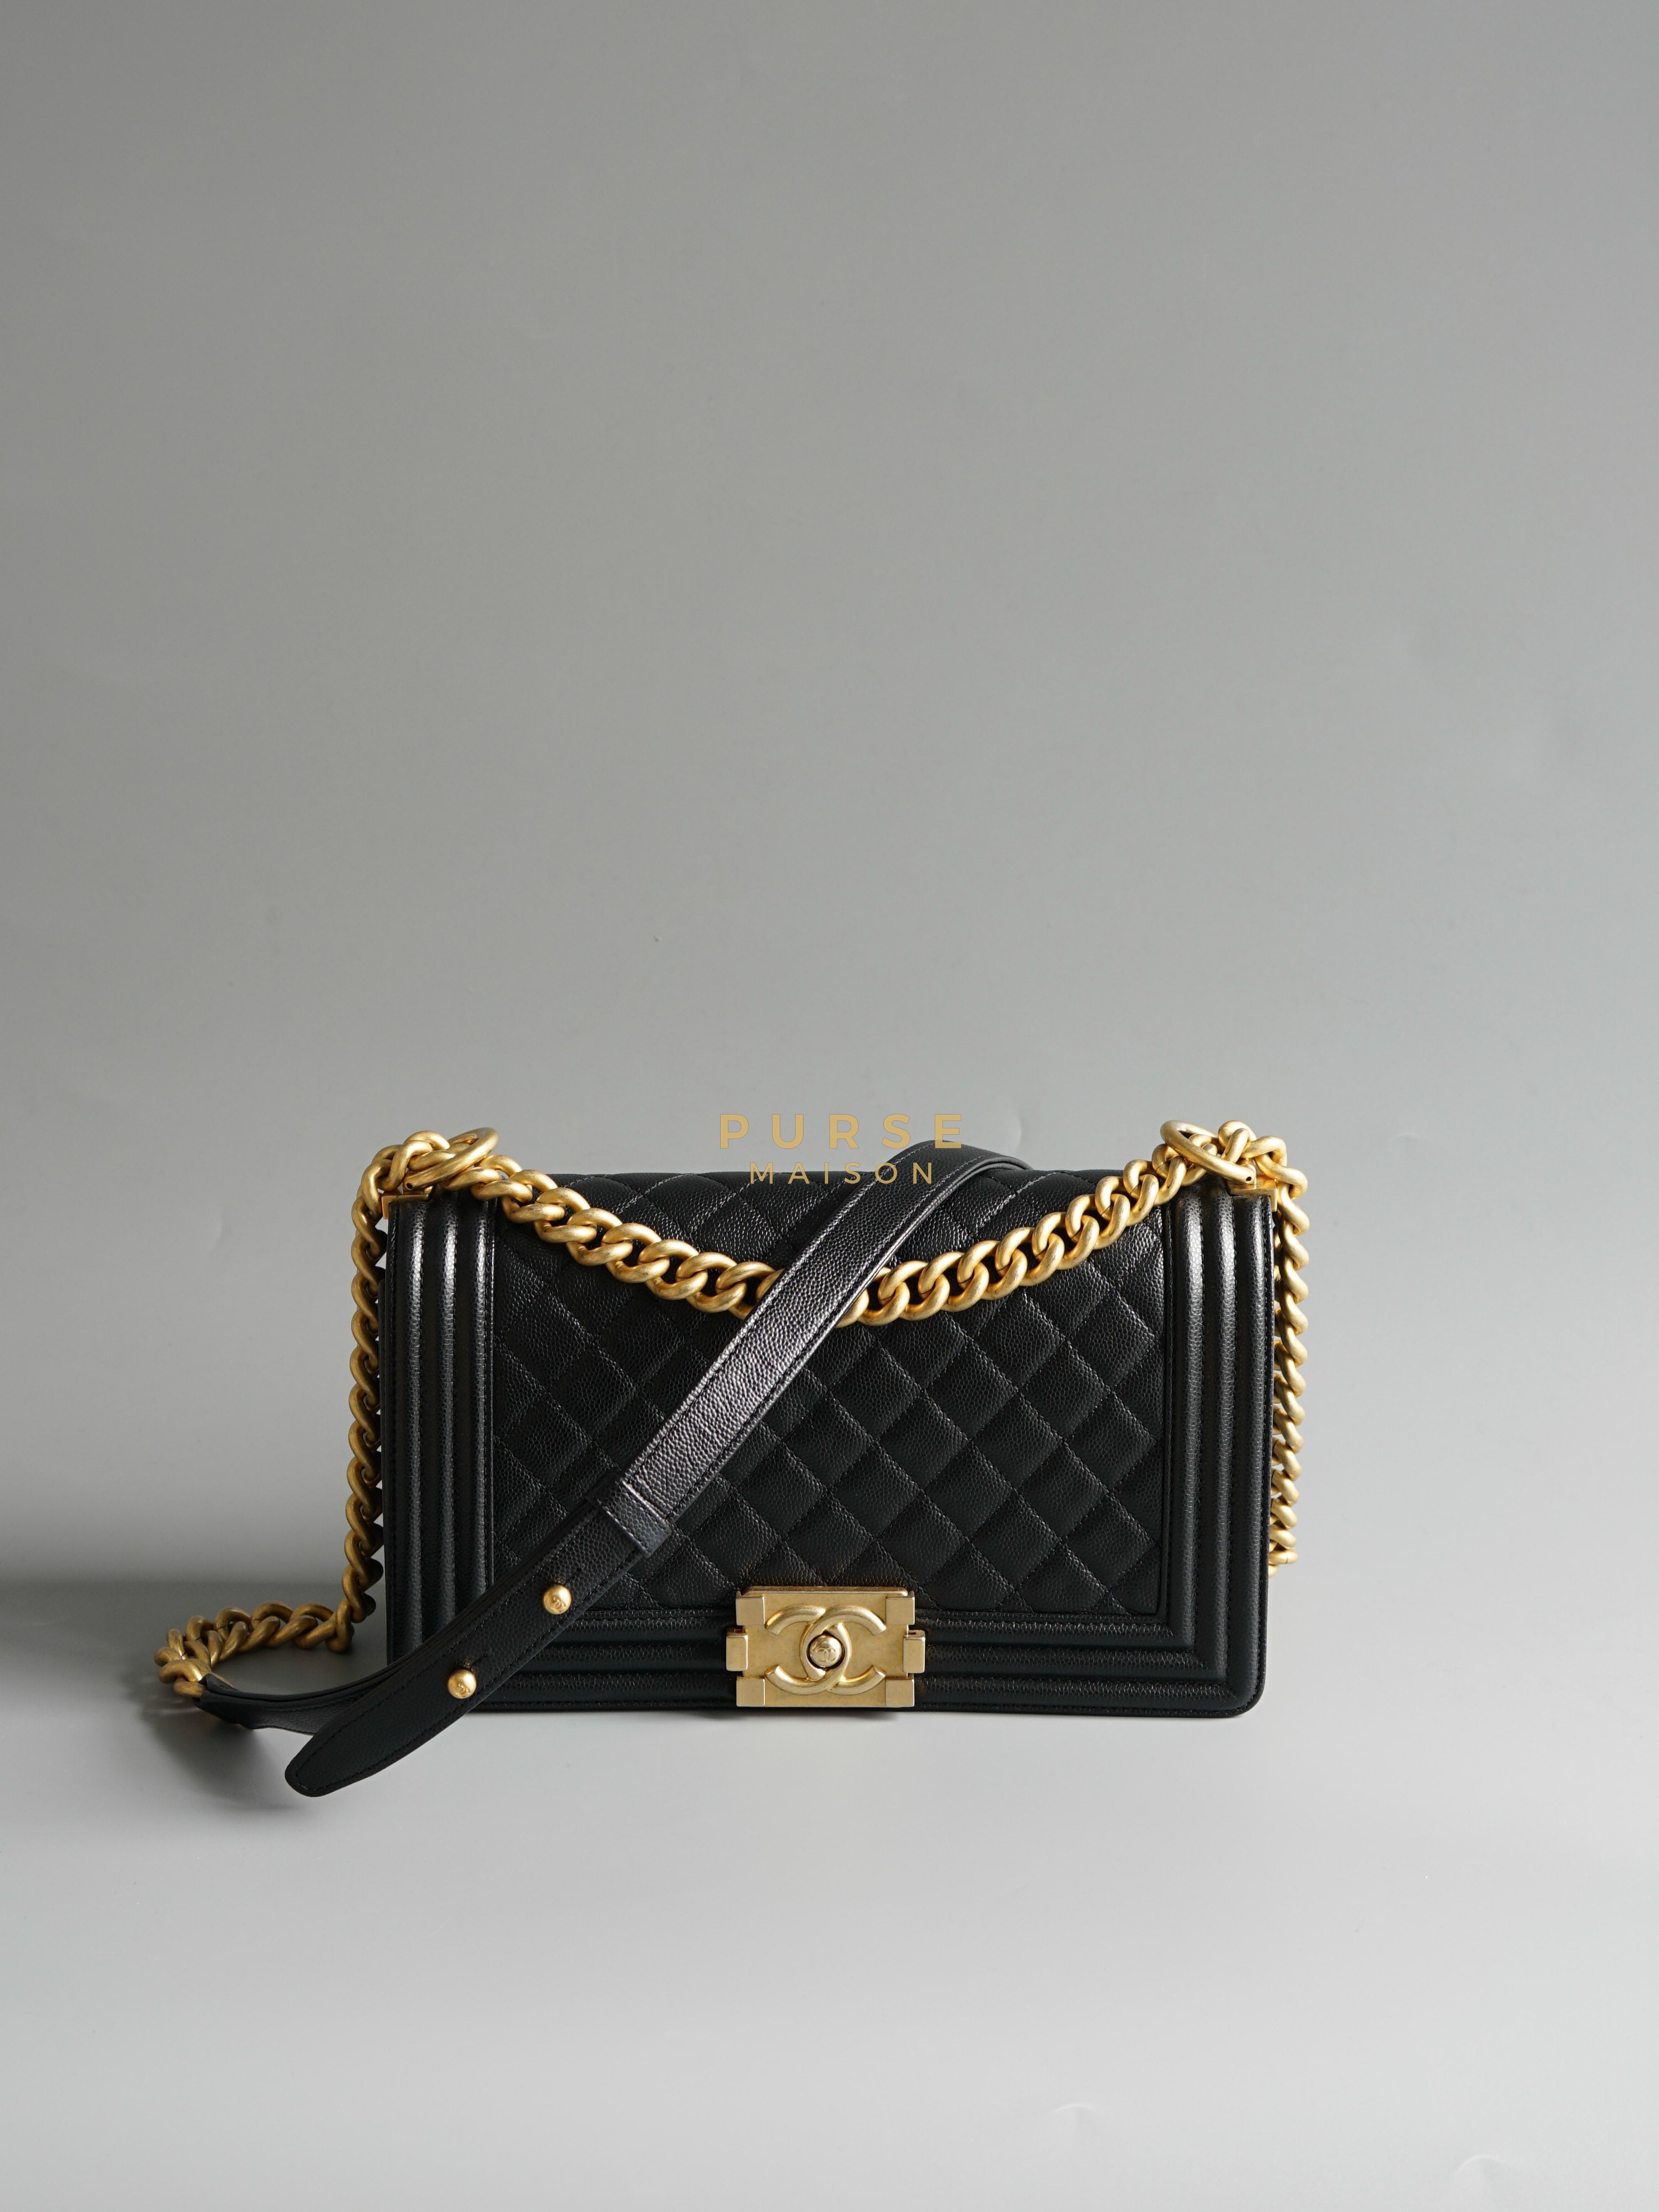 Boy Old Medium in Black Quilted Caviar Leather & Aged Gold Hardware Series 29 | Purse Maison Luxury Bags Shop